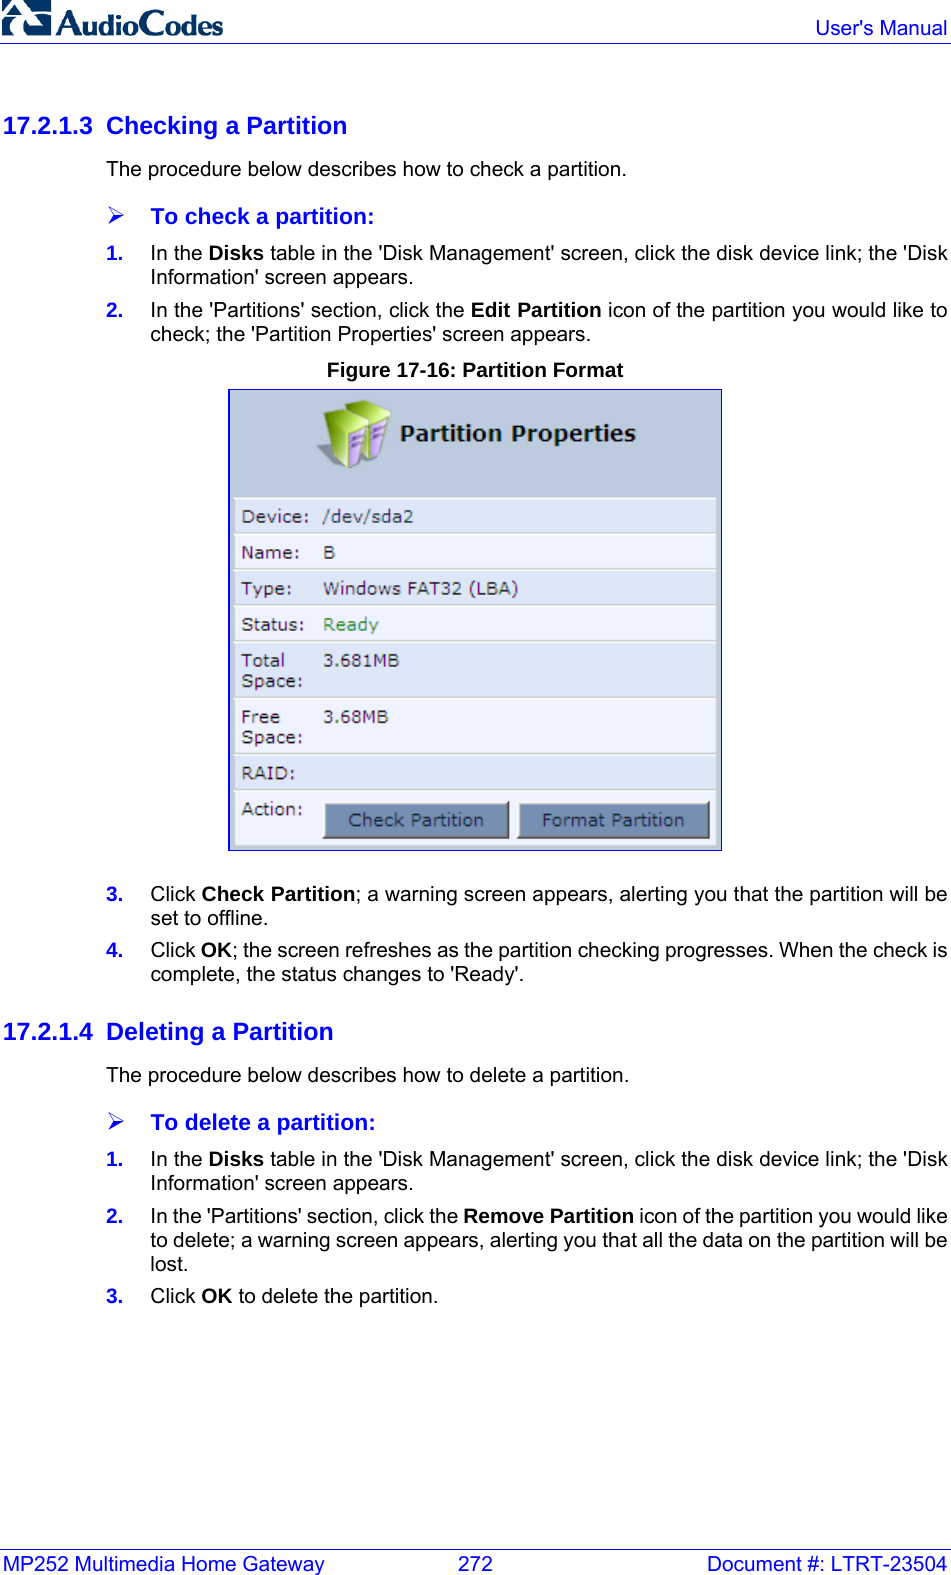 MP252 Multimedia Home Gateway  272  Document #: LTRT-23504  User&apos;s Manual  17.2.1.3 Checking a Partition The procedure below describes how to check a partition. ¾ To check a partition: 1.  In the Disks table in the &apos;Disk Management&apos; screen, click the disk device link; the &apos;Disk Information&apos; screen appears.  2.  In the &apos;Partitions&apos; section, click the Edit Partition icon of the partition you would like to check; the &apos;Partition Properties&apos; screen appears. Figure 17-16: Partition Format  3.  Click Check Partition; a warning screen appears, alerting you that the partition will be set to offline. 4.  Click OK; the screen refreshes as the partition checking progresses. When the check is complete, the status changes to &apos;Ready&apos;. 17.2.1.4 Deleting a Partition The procedure below describes how to delete a partition. ¾ To delete a partition: 1.  In the Disks table in the &apos;Disk Management&apos; screen, click the disk device link; the &apos;Disk Information&apos; screen appears.  2.  In the &apos;Partitions&apos; section, click the Remove Partition icon of the partition you would like to delete; a warning screen appears, alerting you that all the data on the partition will be lost. 3.  Click OK to delete the partition. 